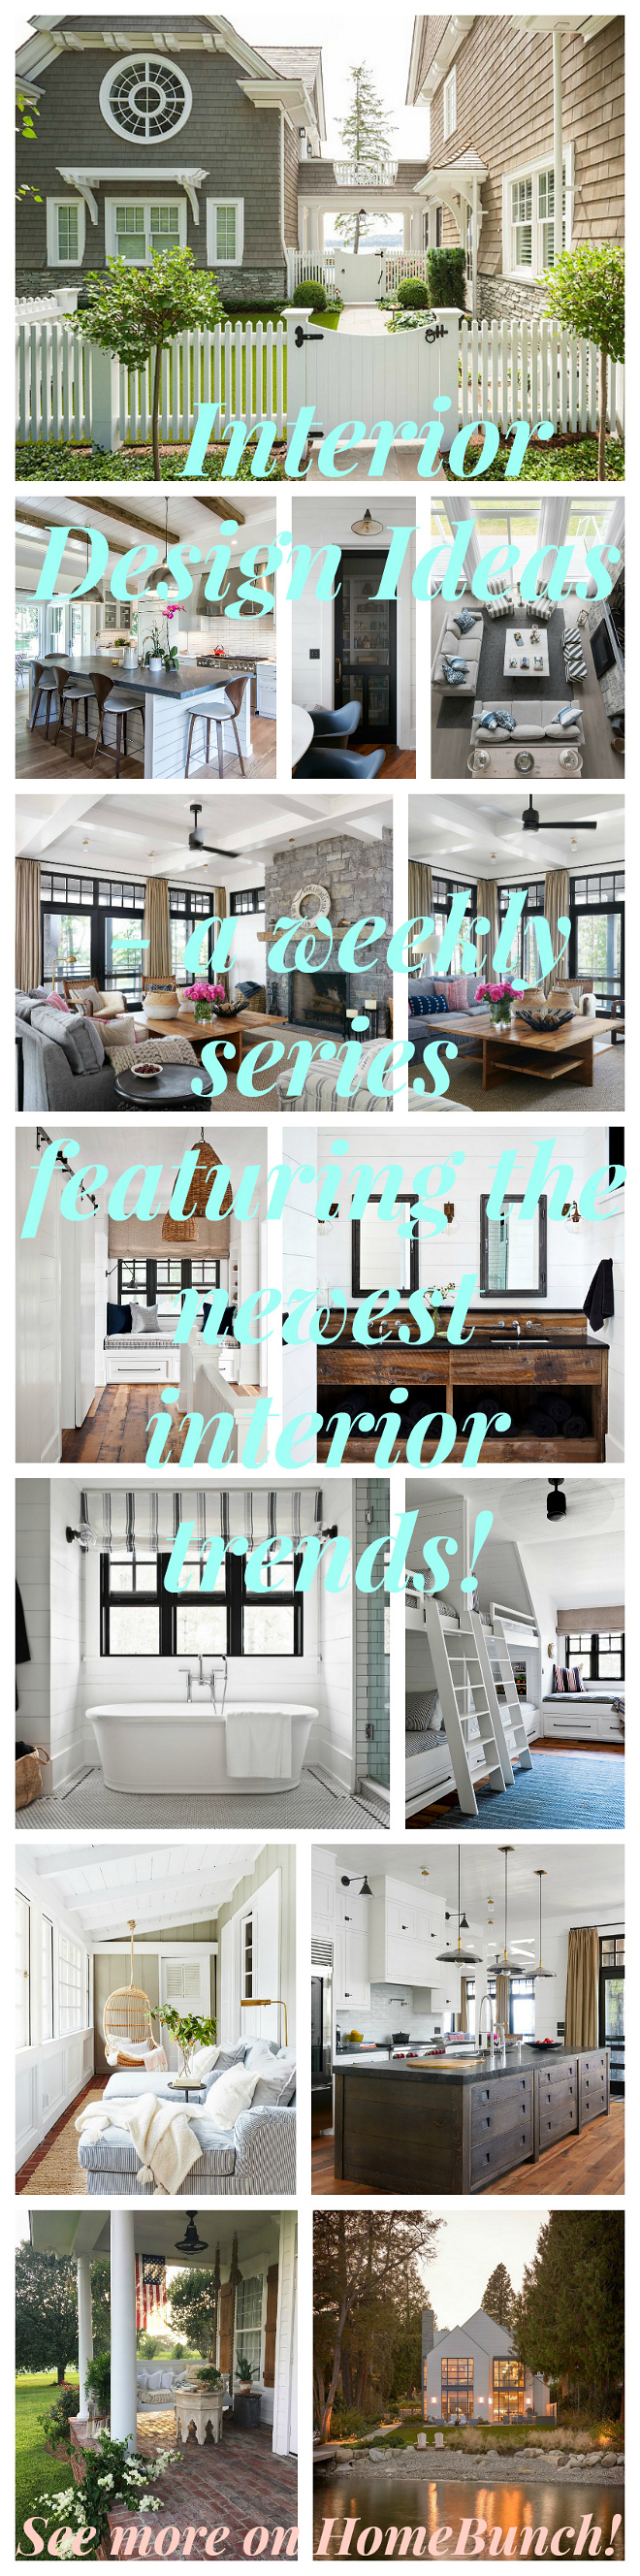 Interior Design Ideas - a weekly series featuring the newest interior trends! See more on HomeBunch!